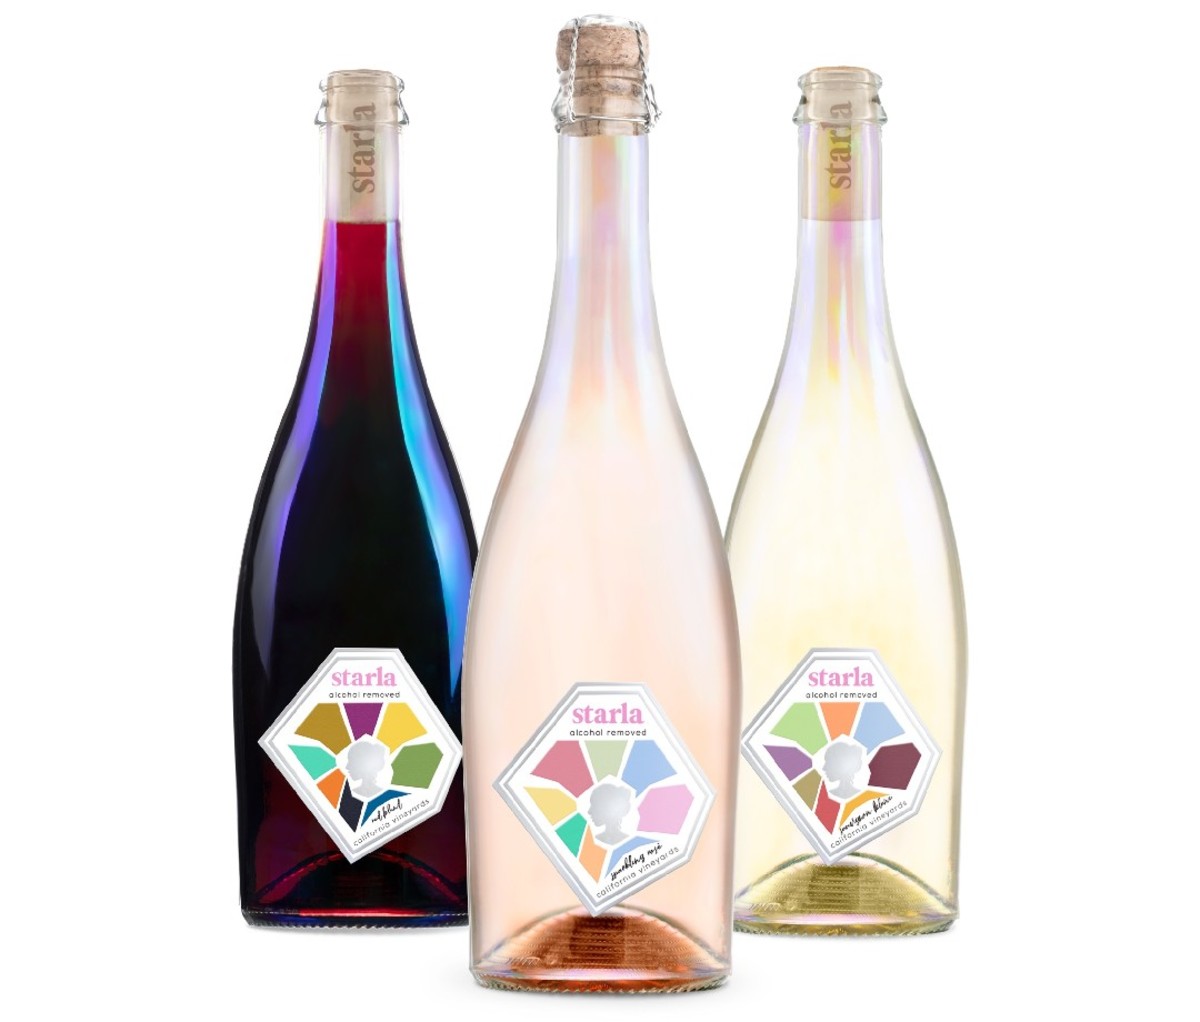 Three bottles of sparkling wine from the Starla Wines Collection